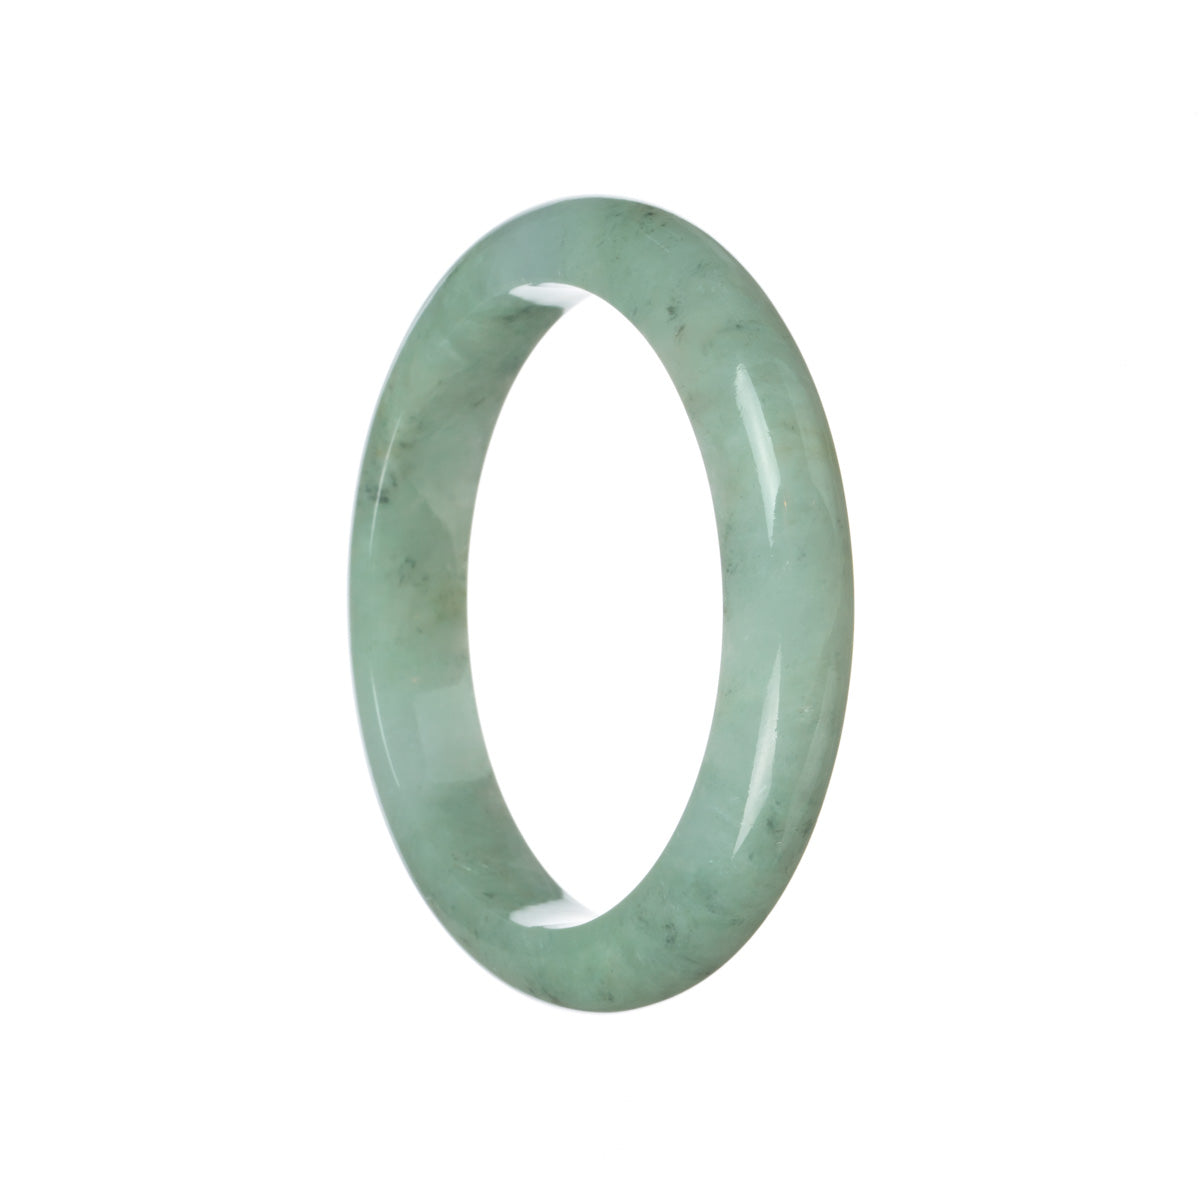 A close-up image of an authentic Burmese Jade Bangle Bracelet with a light grey color and grey spots. The bracelet has a semi-round shape with a diameter of 60mm. Designed by MAYS™, this piece showcases the natural beauty of Burmese Jade.